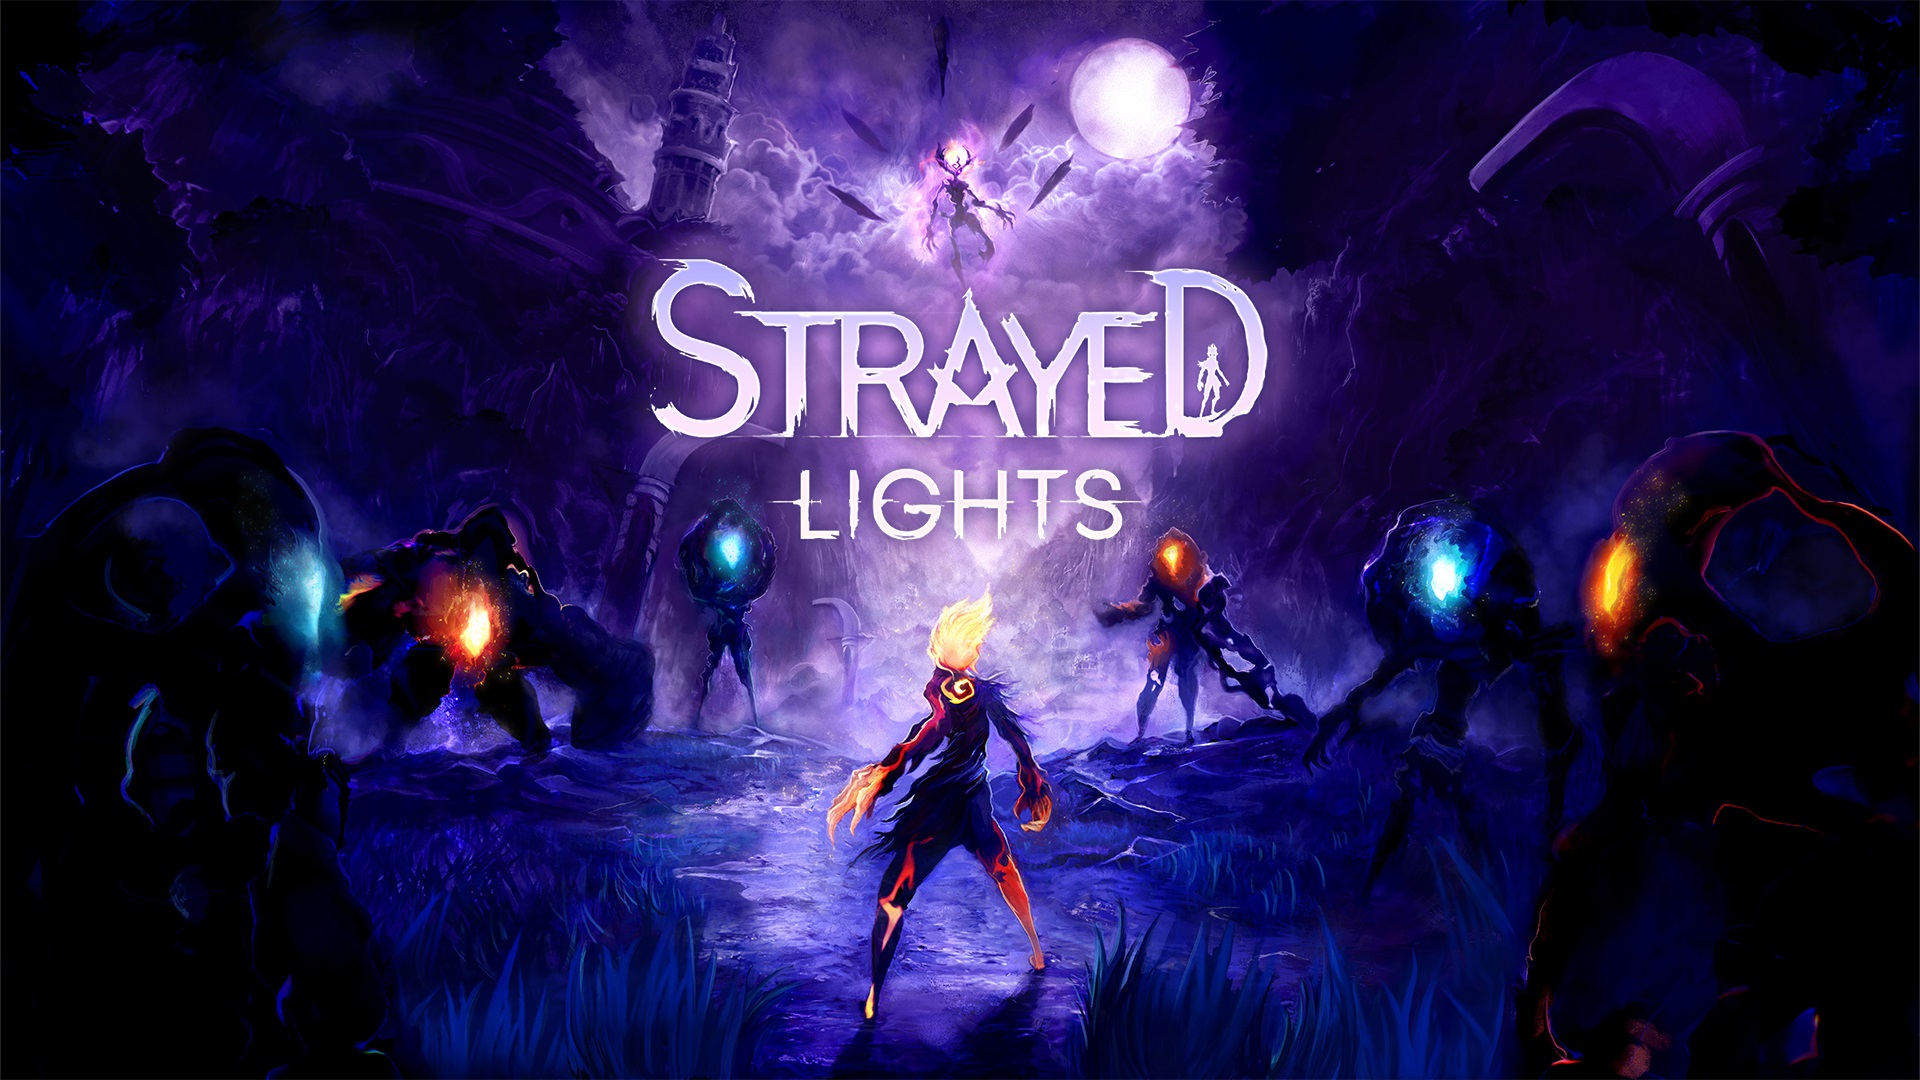 Atmospheric action-adventure game Strayed Lights launches in April